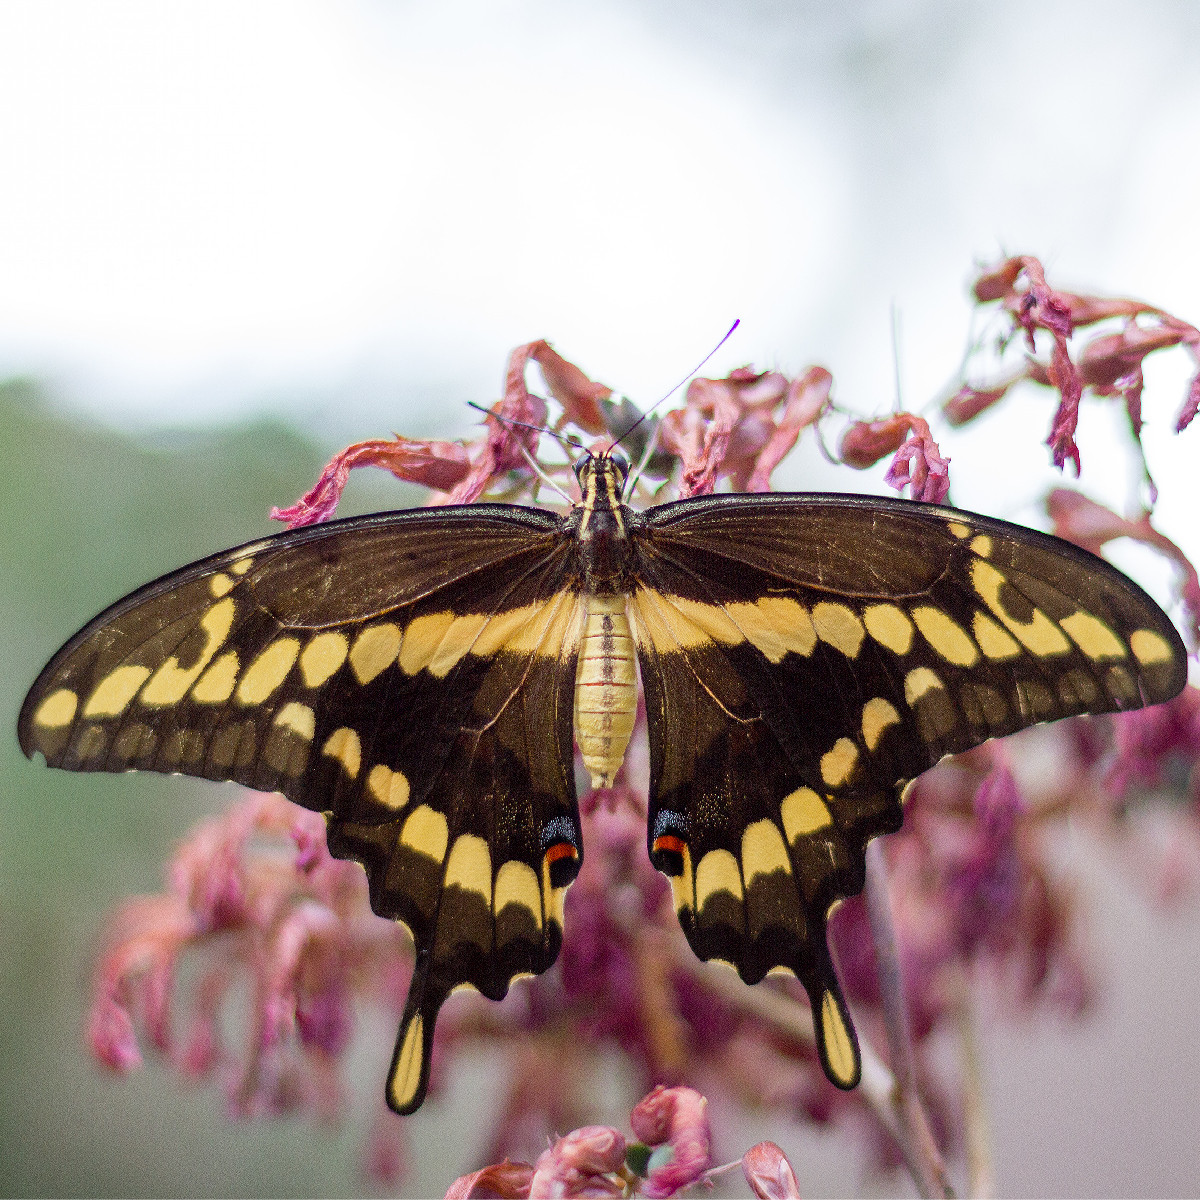 Giant Swallowtail butterfly